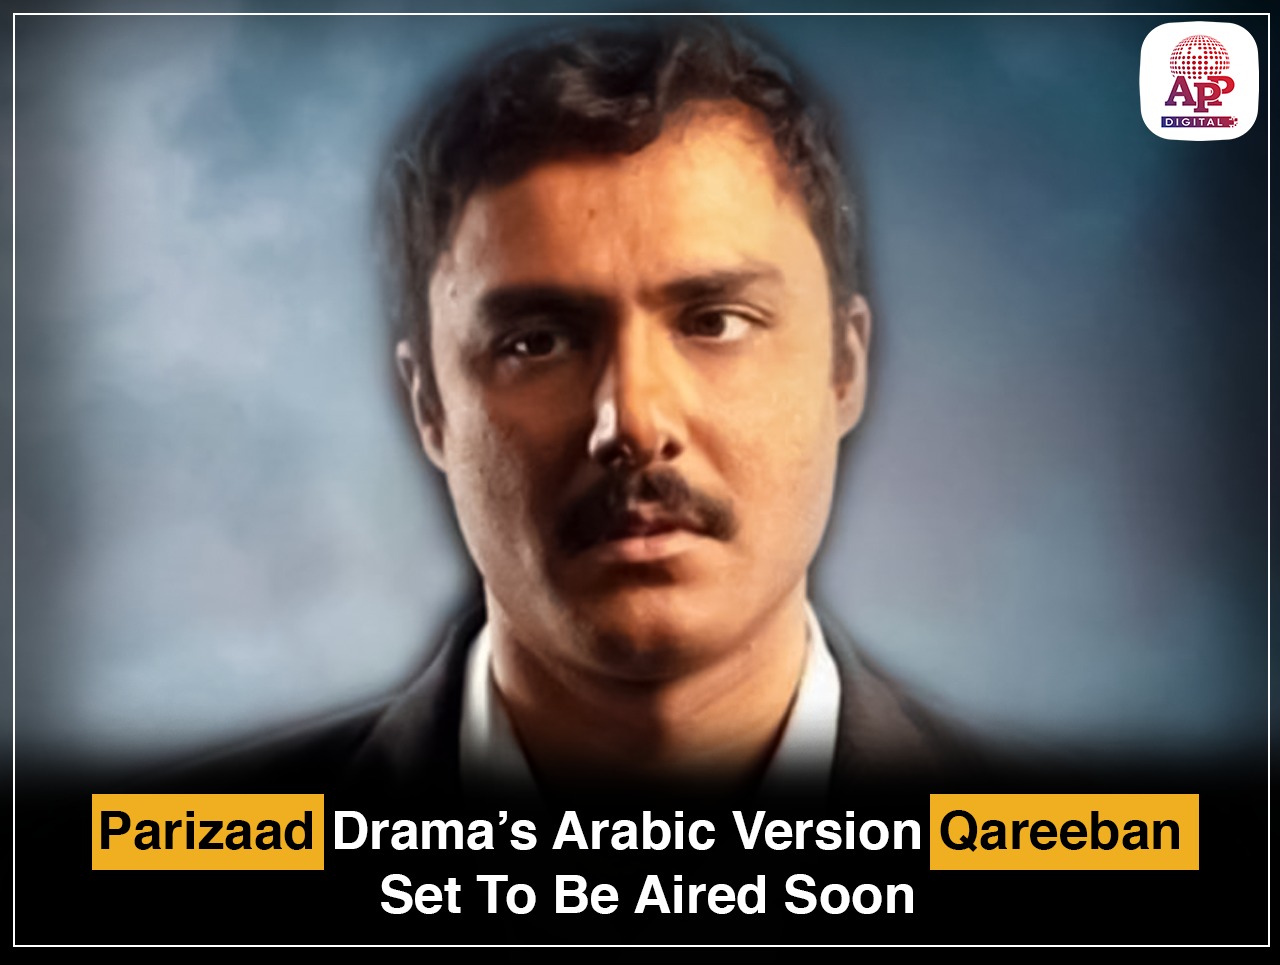 The Arabic version of Parizaad sets to air soon.